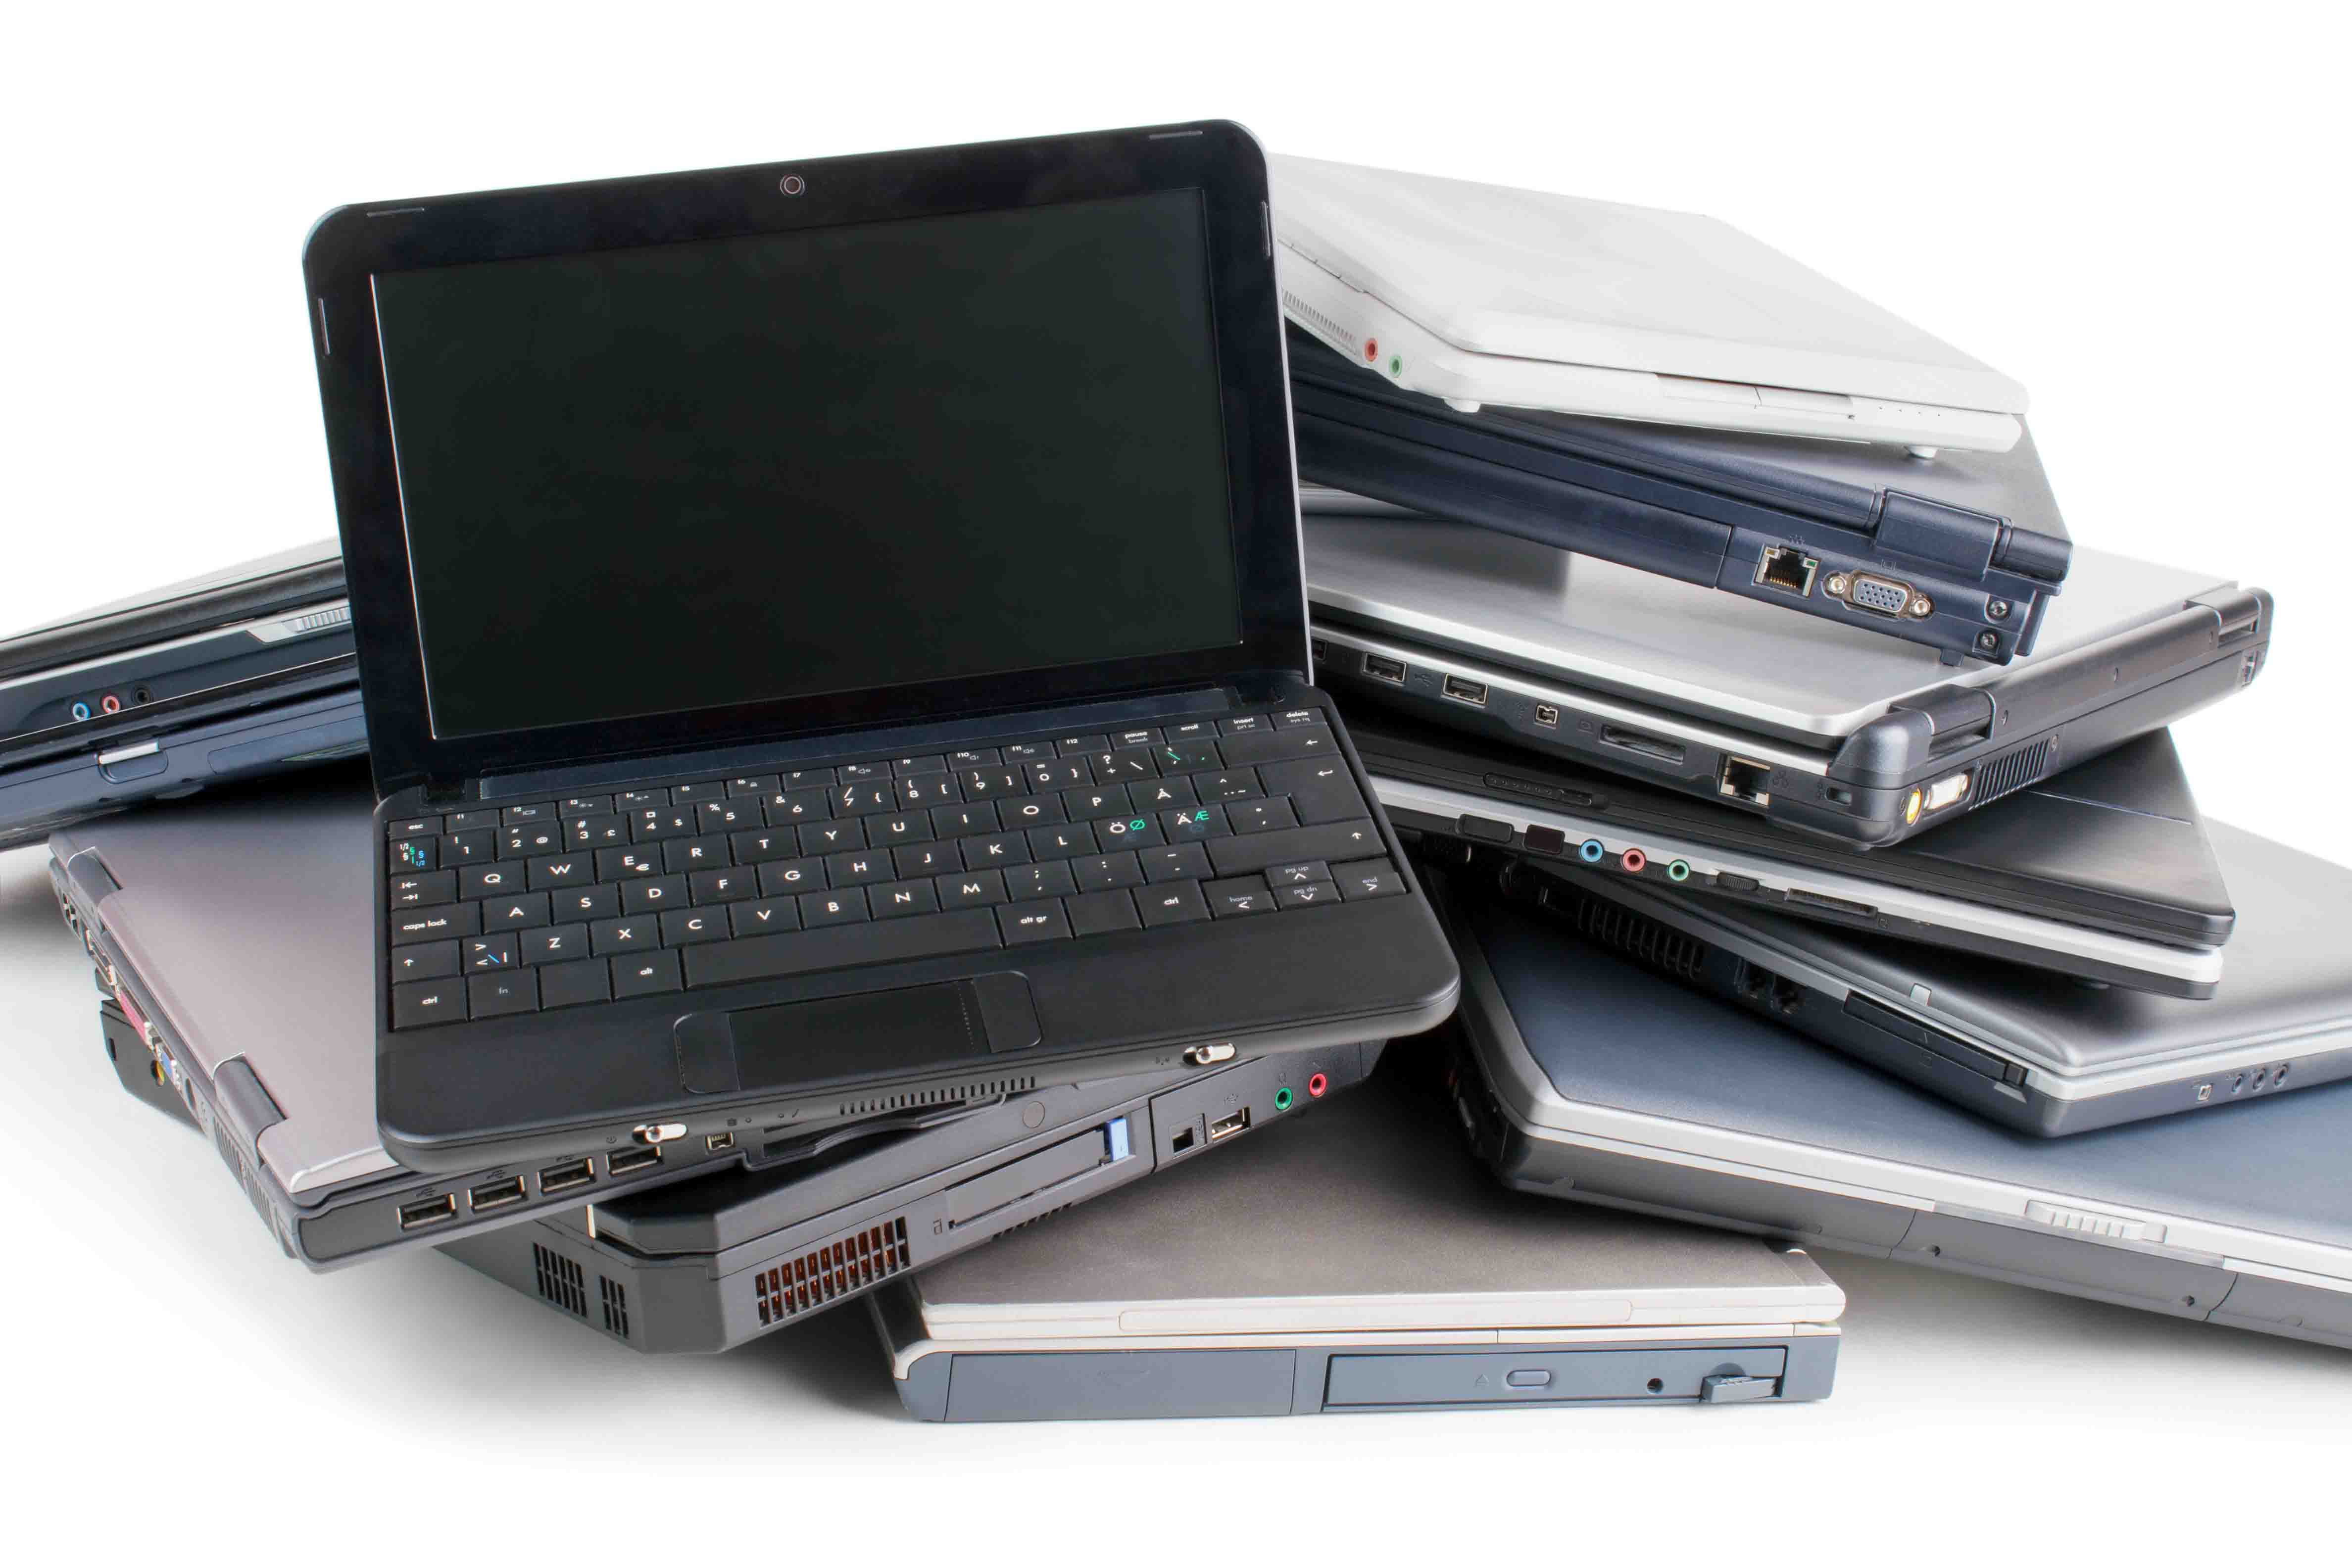 *** Local Caption *** Stack of used laptops for recycle , white background